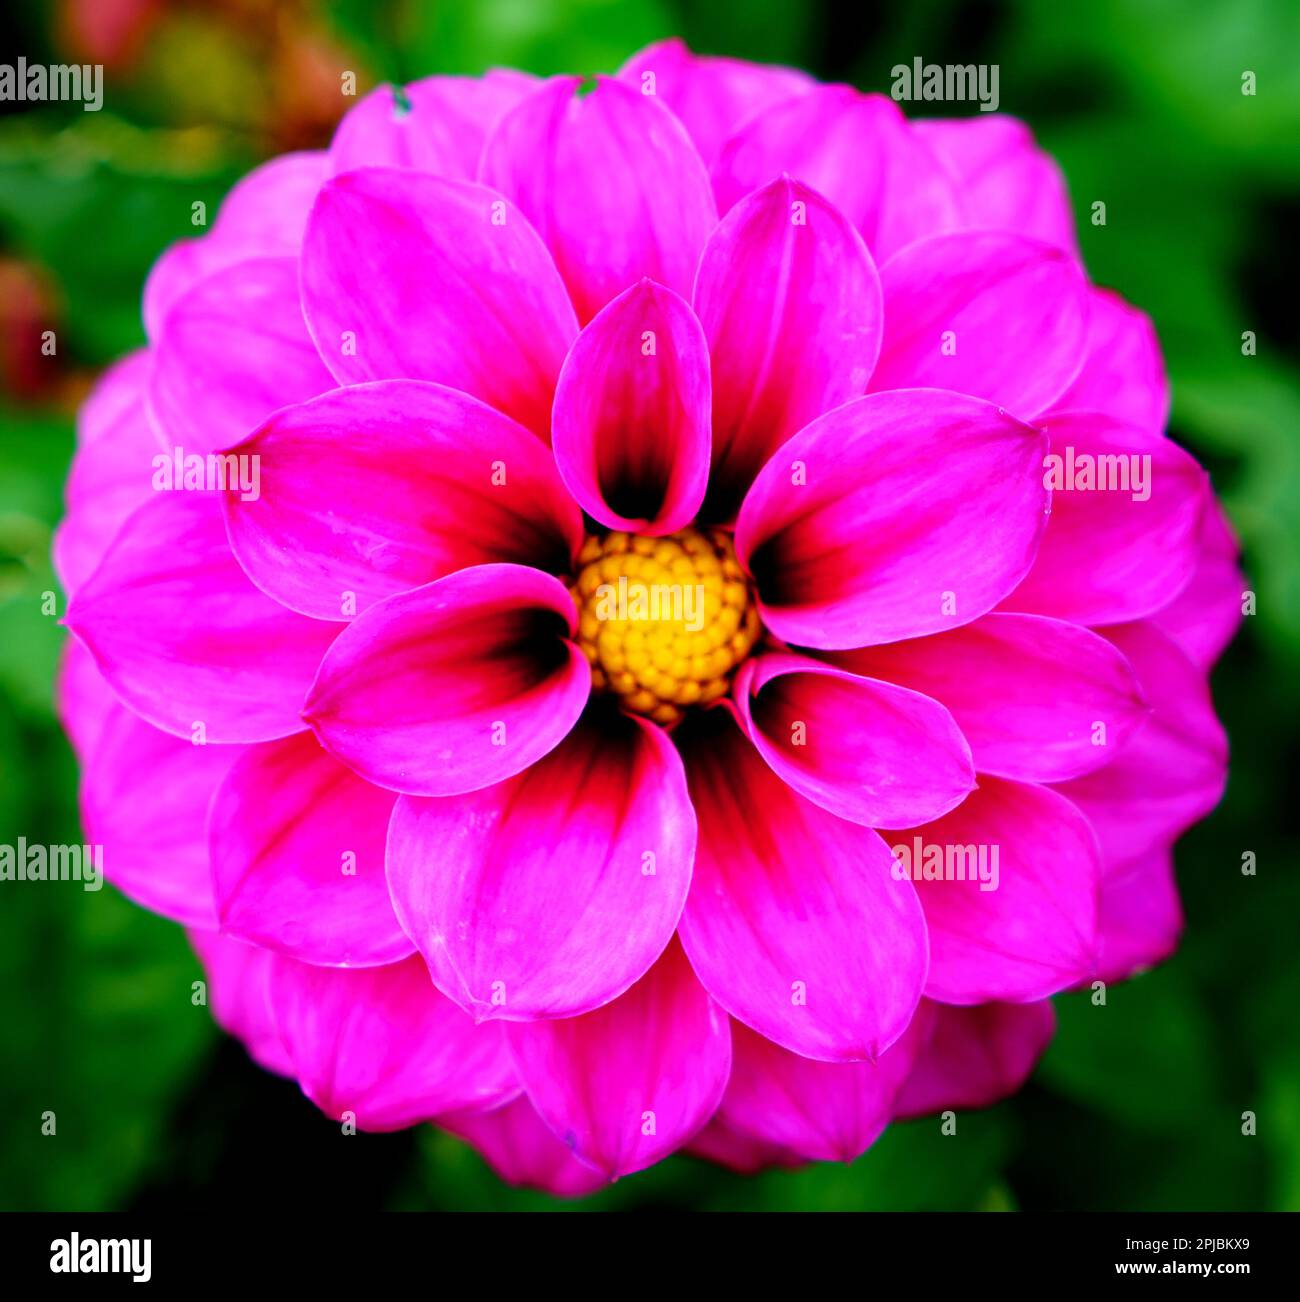 Pink Dahlia close up with green background Stock Photo